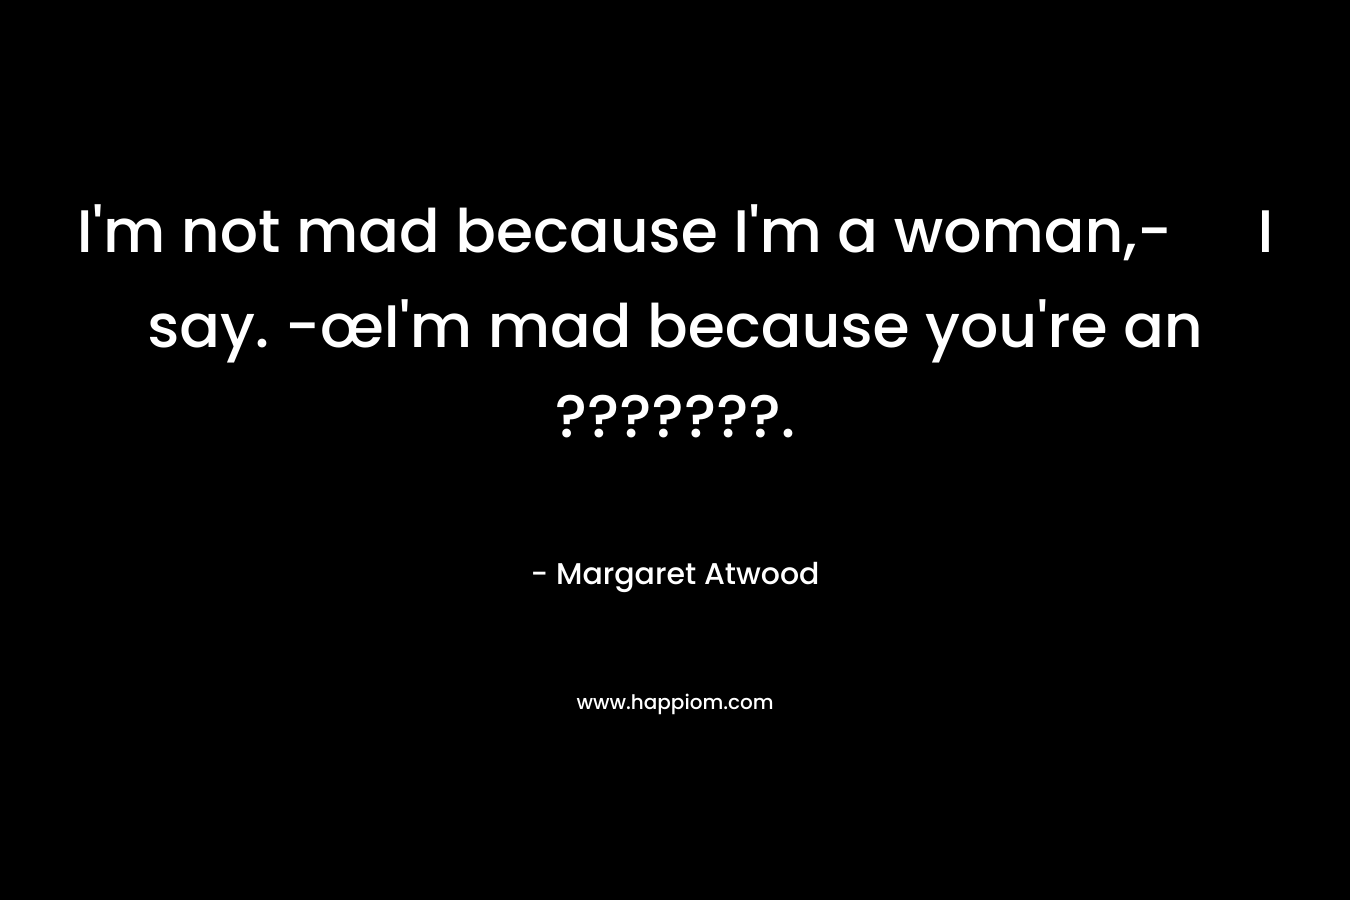 I'm not mad because I'm a woman,- I say. -œI'm mad because you're an ???????.